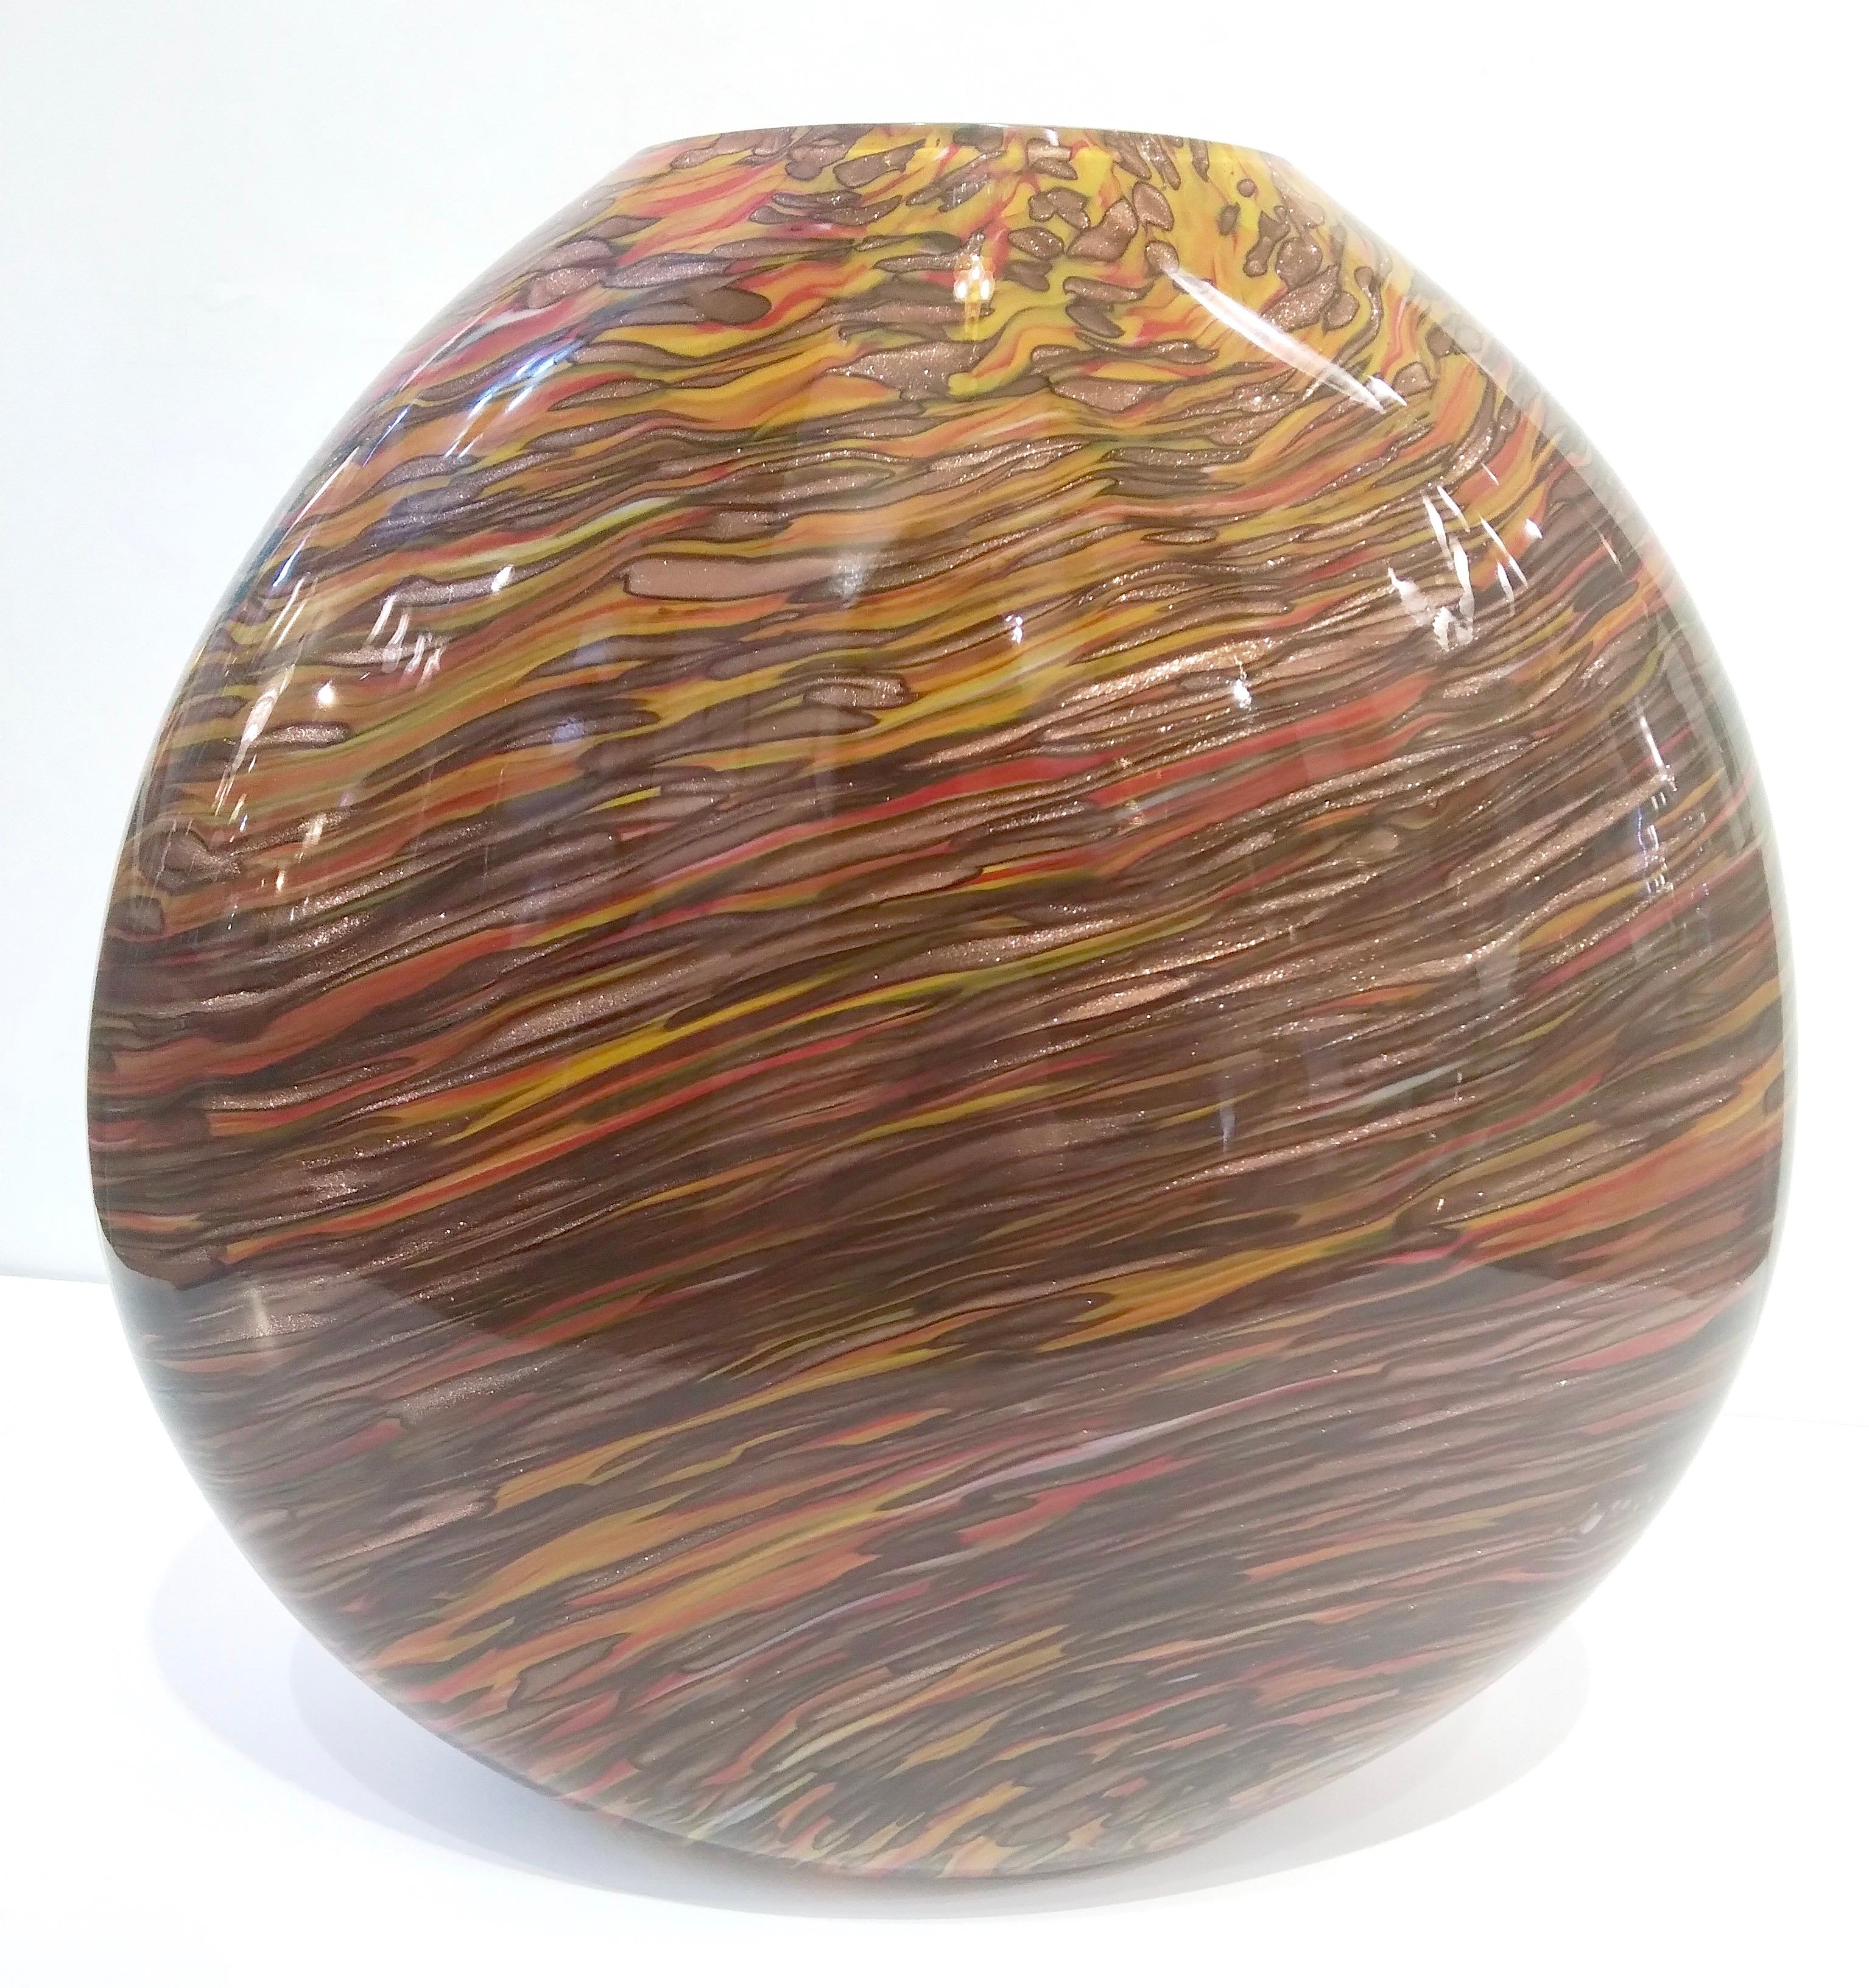 Formia 1980s Modern Elliptical Brown Yellow Red Orange Gold Murano Glass Vase For Sale 9